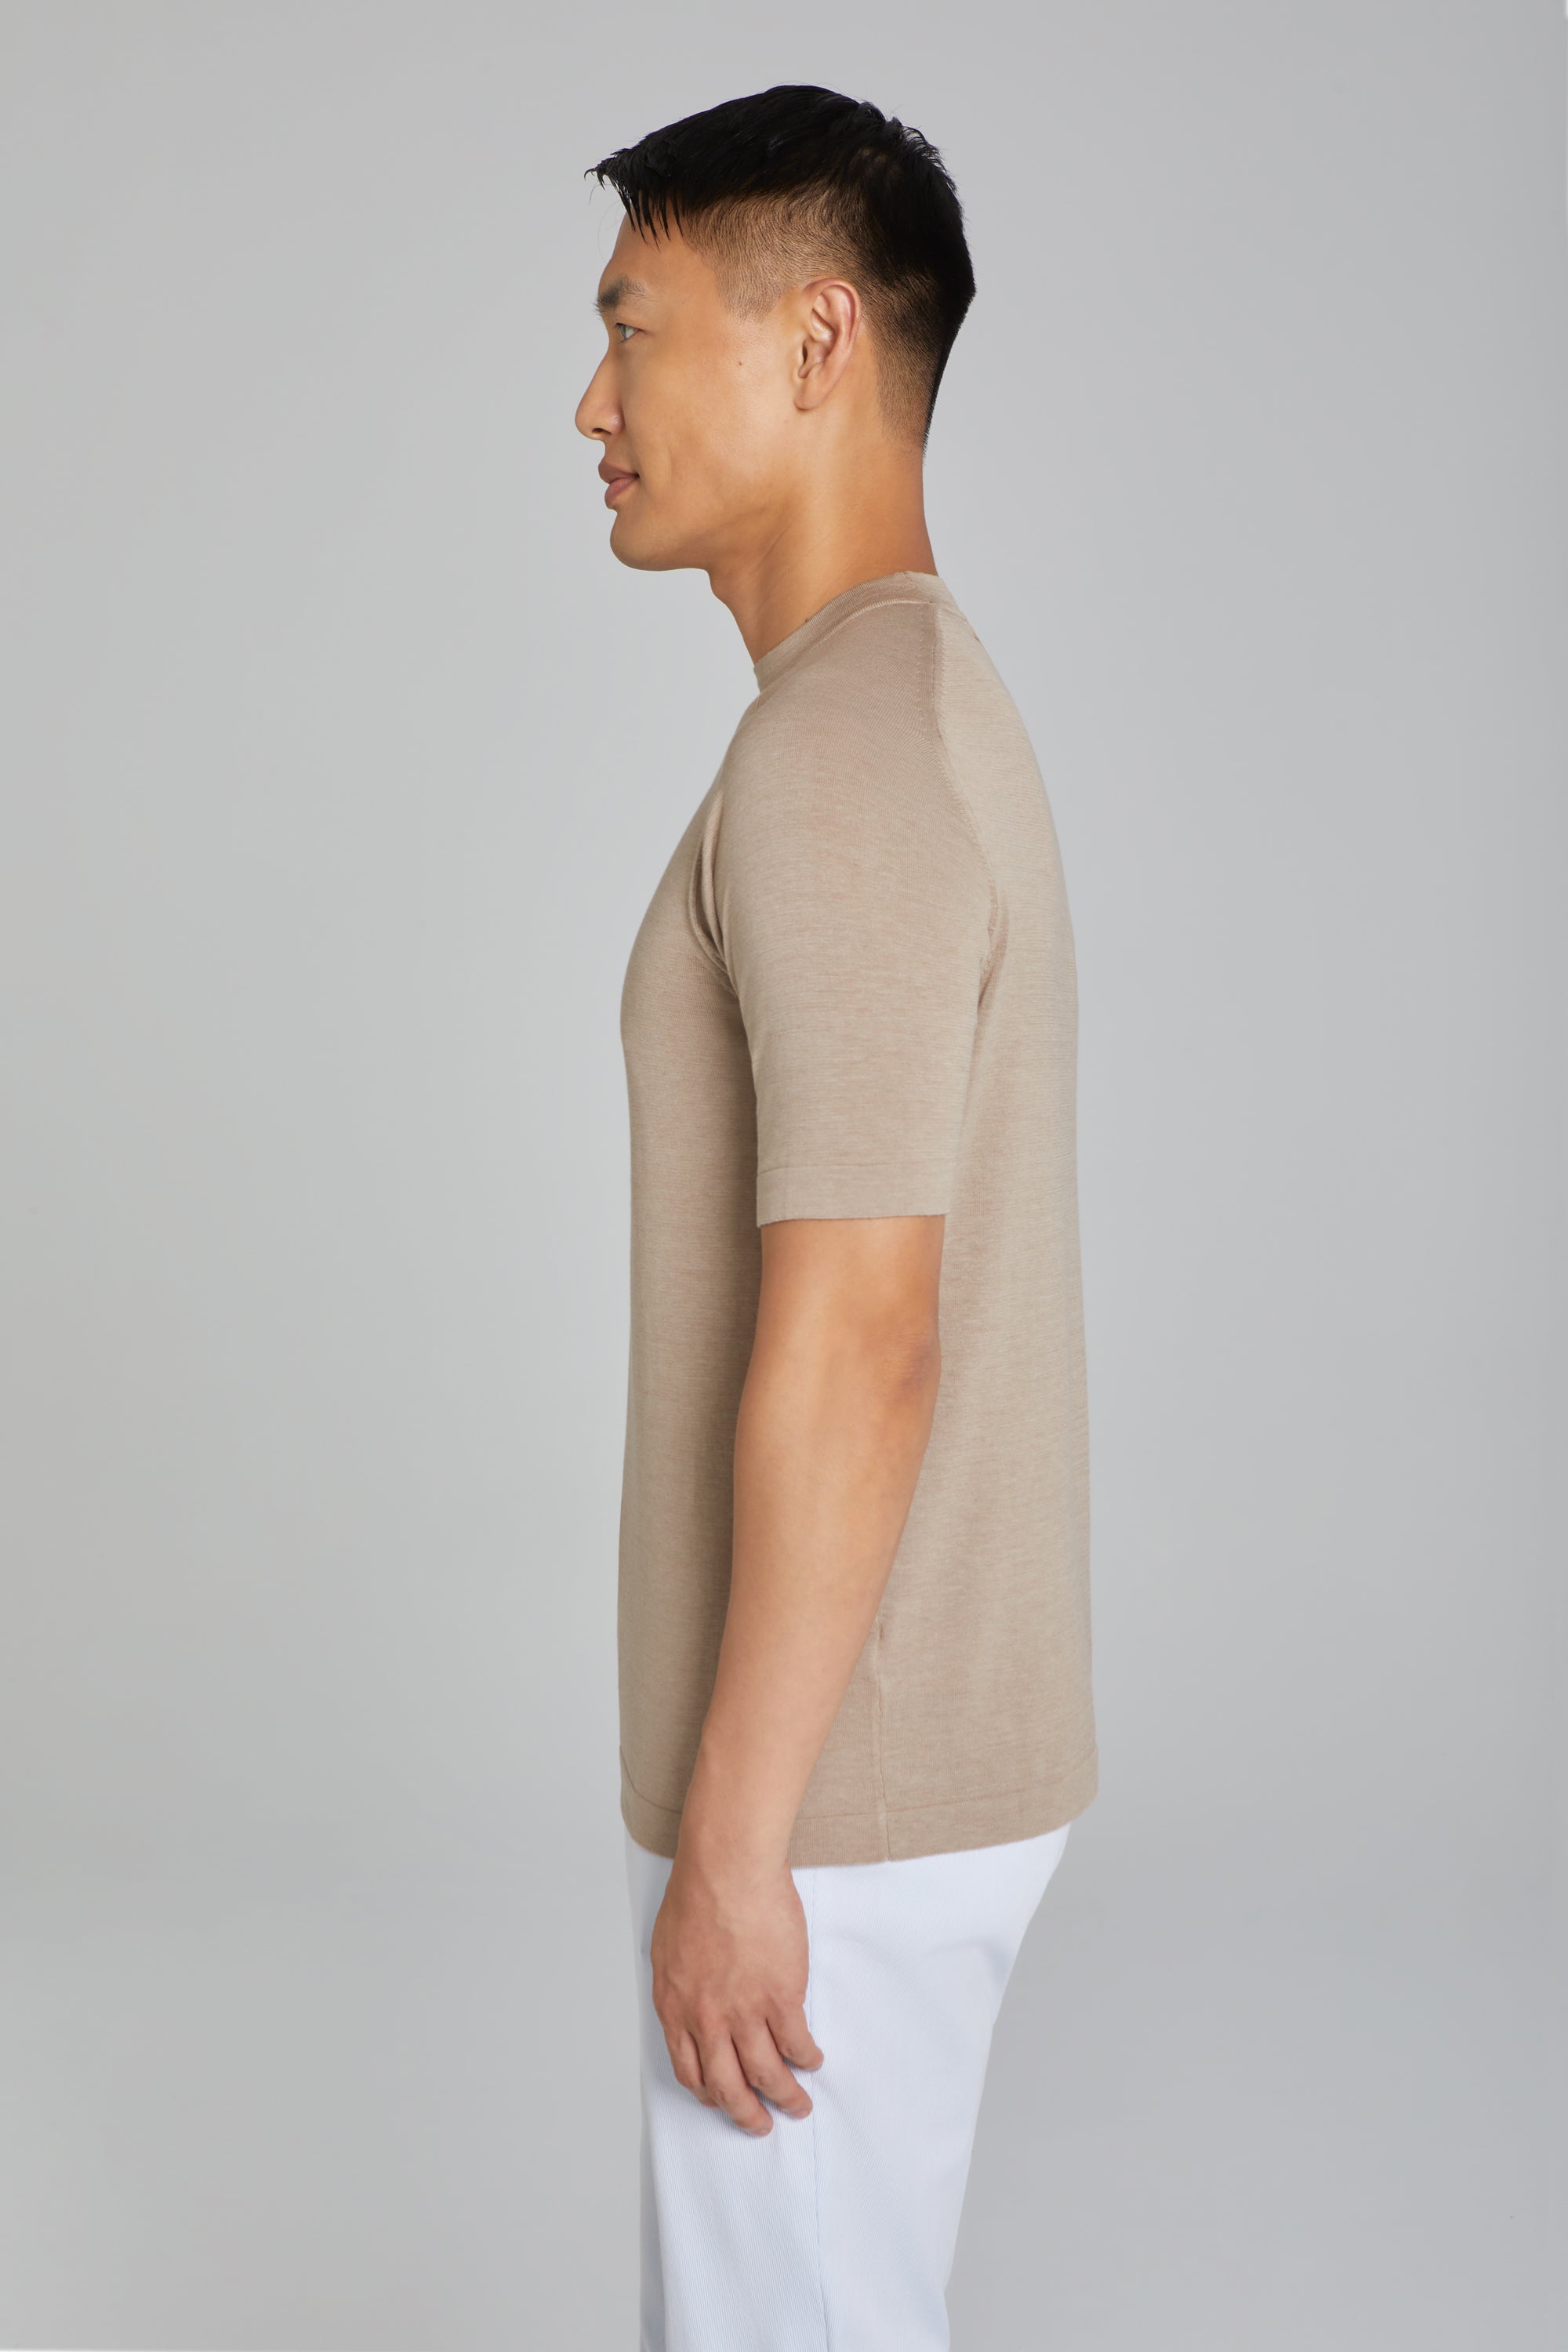 Image of SetiCo Cotton and Silk Knit Crew Neck in Tan-Jack Victor